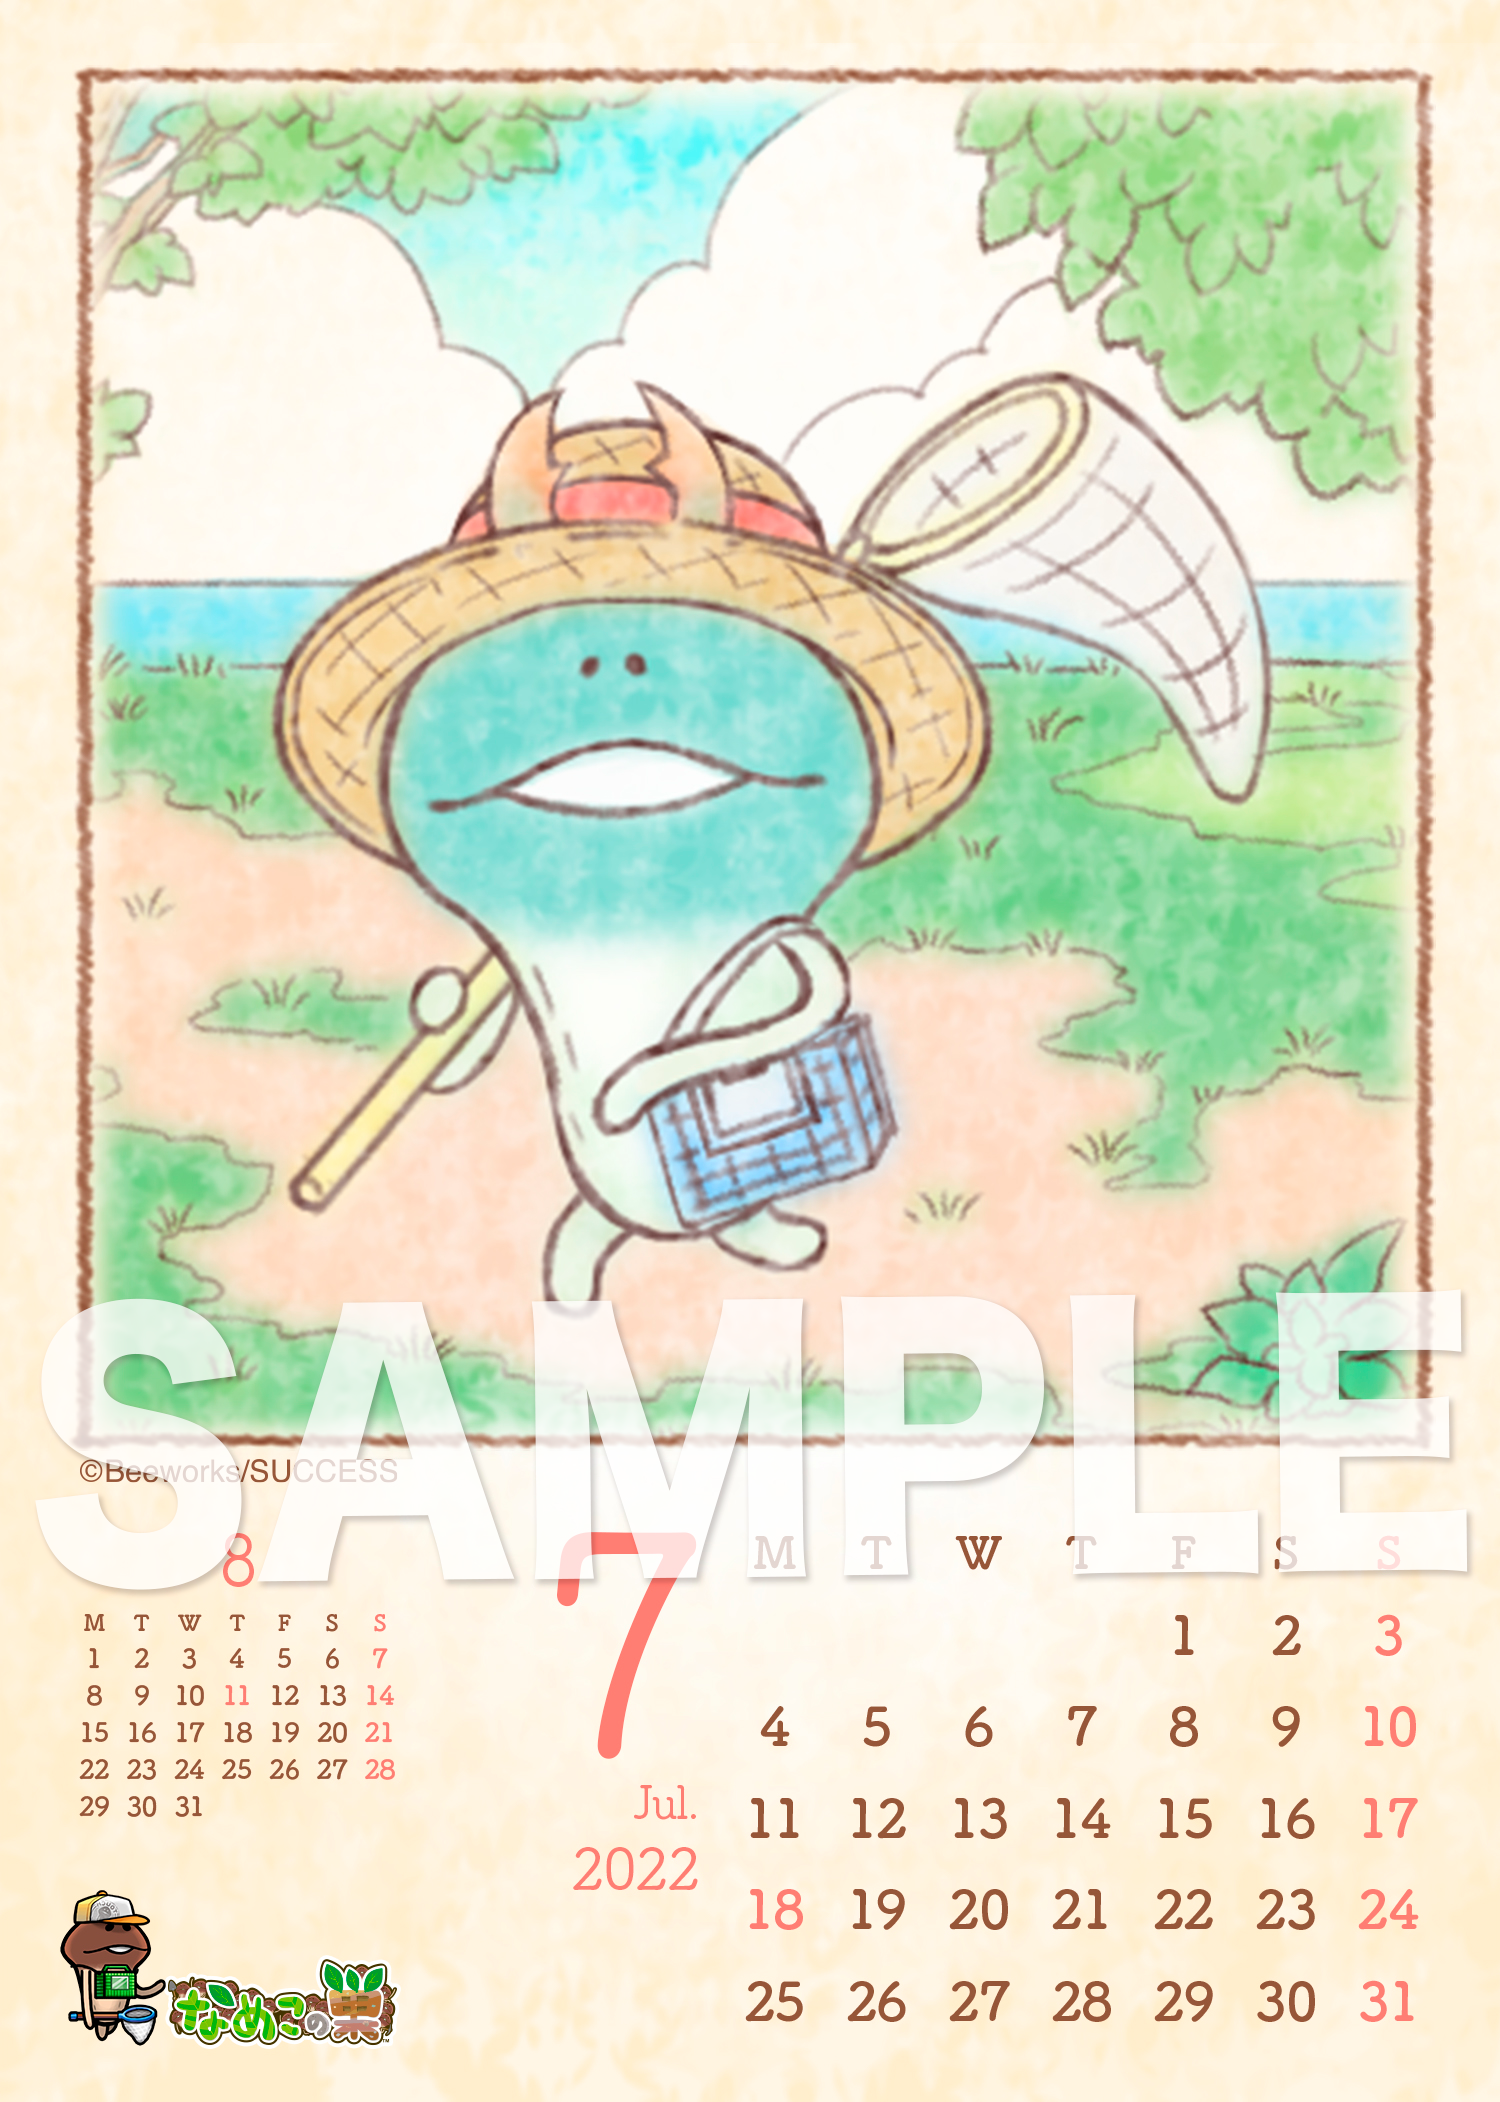 nameko_fancolle_2207_a.png